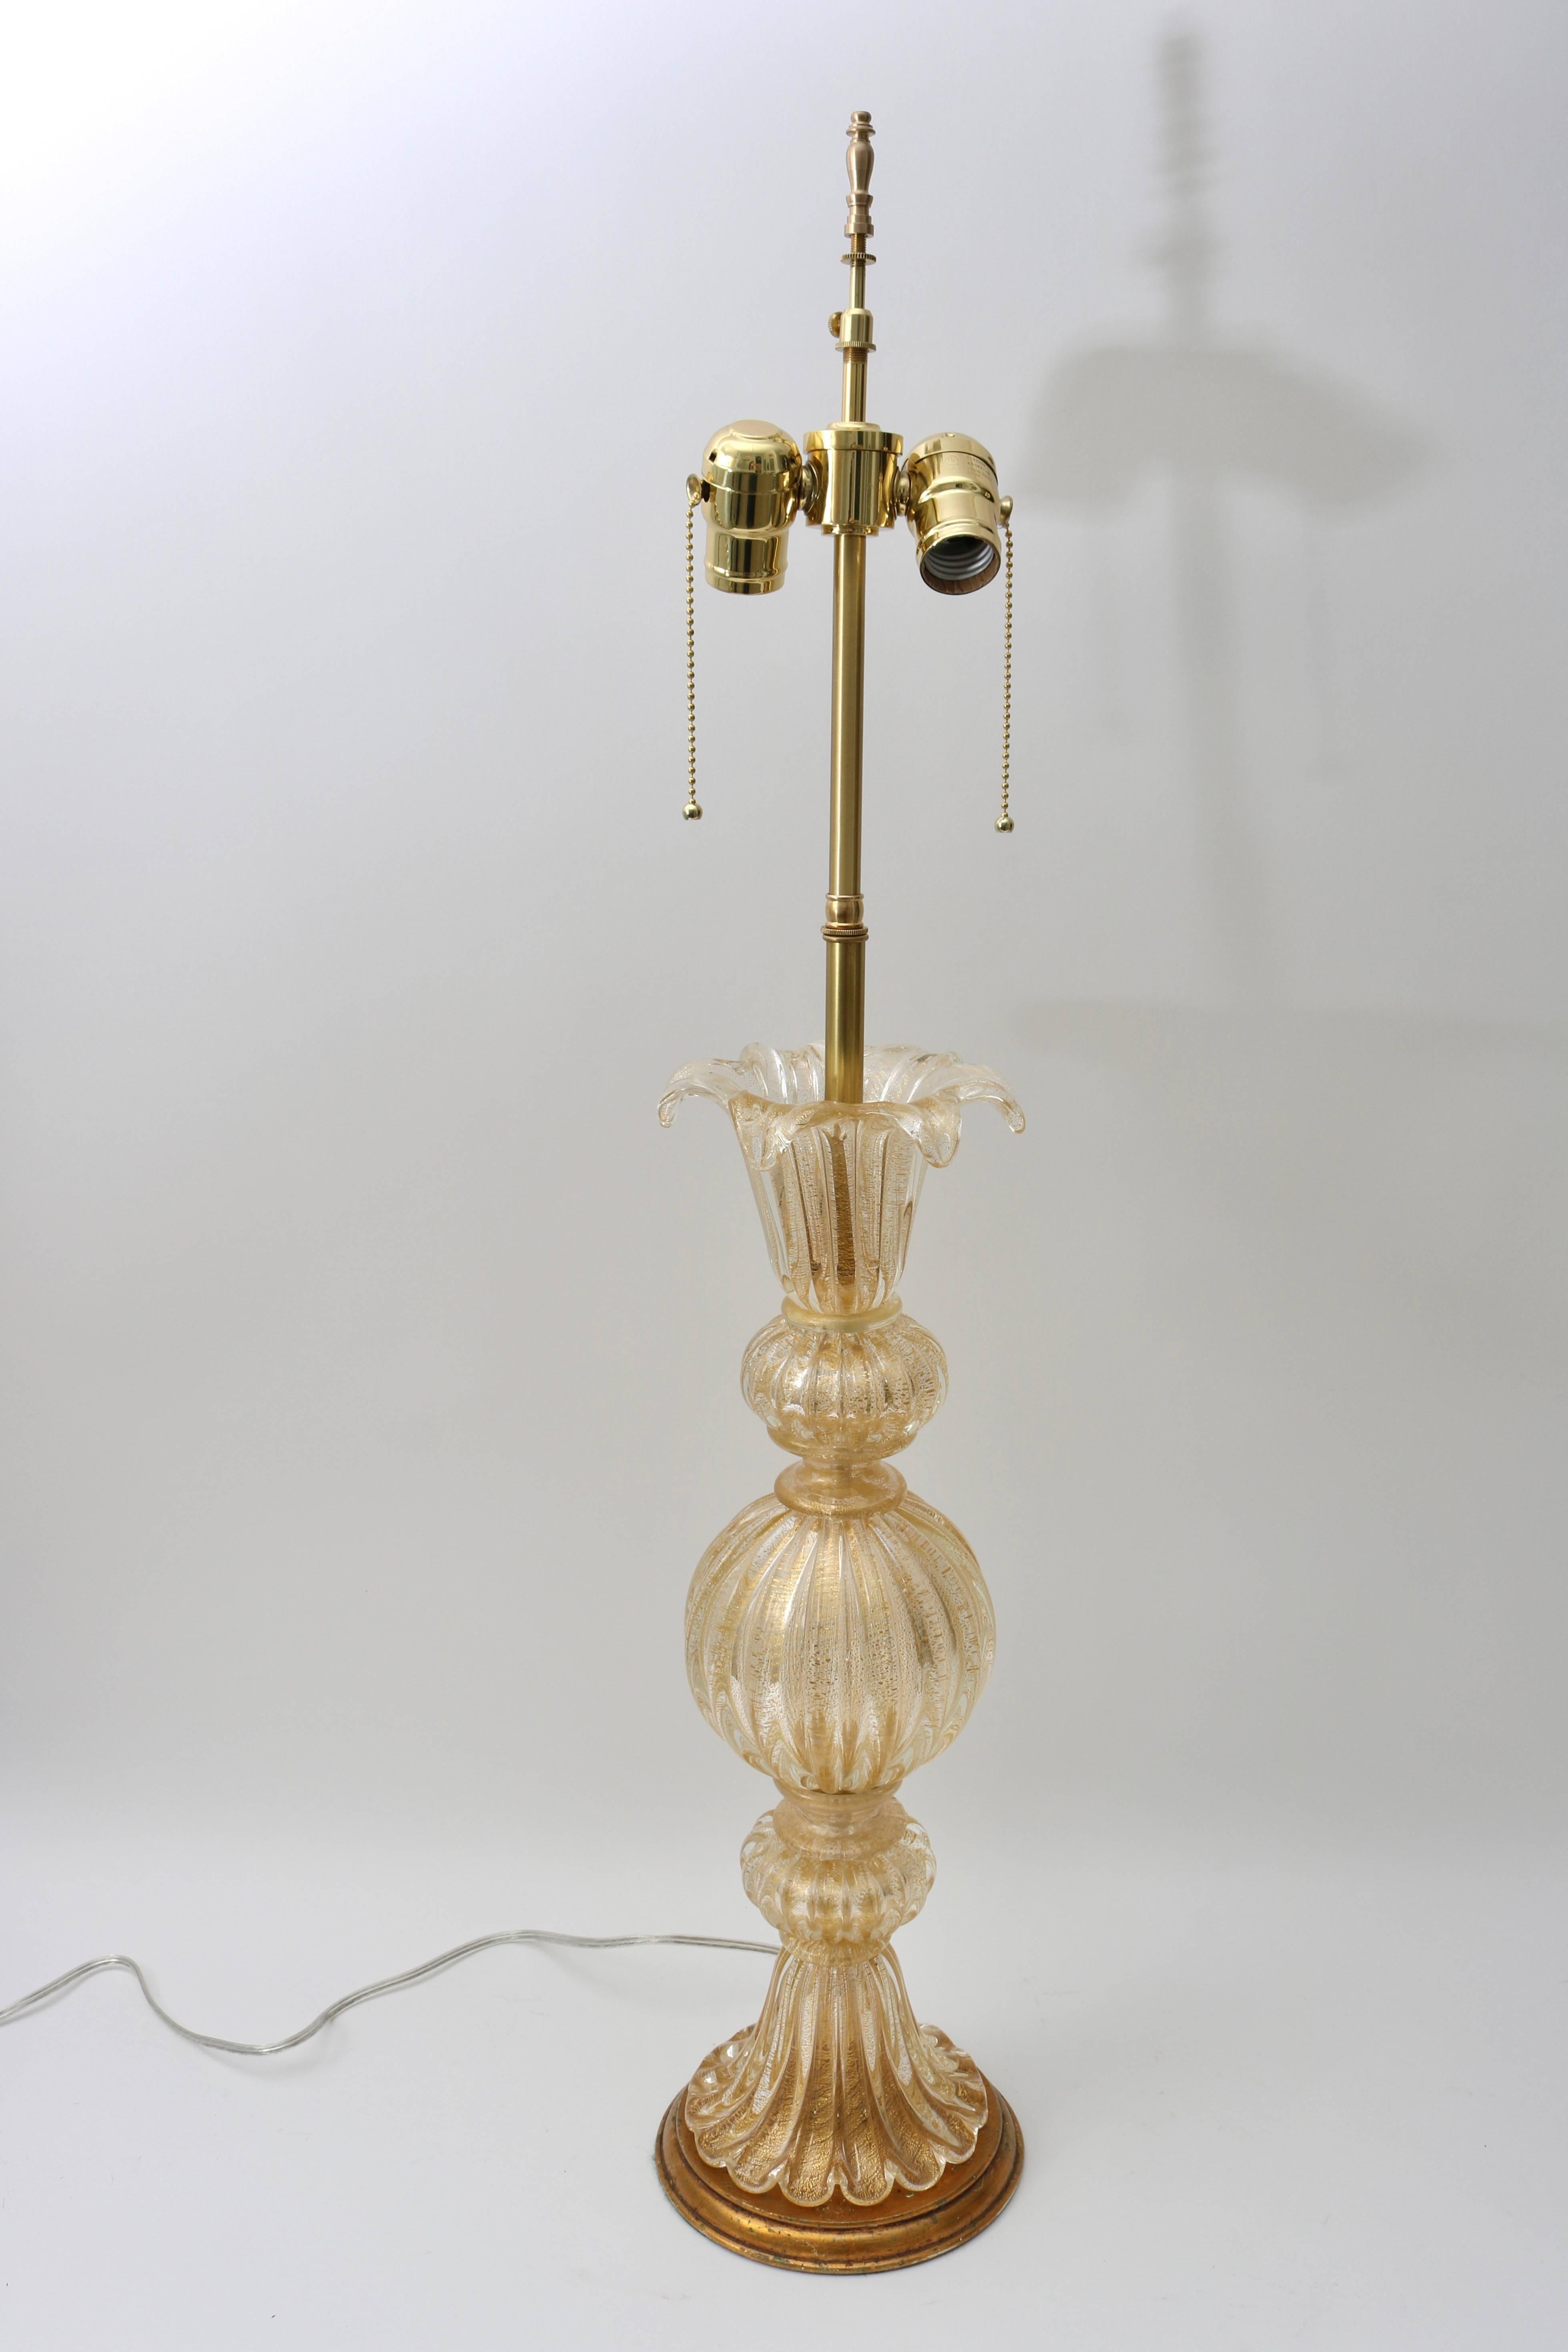 Hollywood Regency Pair of Barovier Et Toso Murano Glass Lamps in Clear Gold Coloration